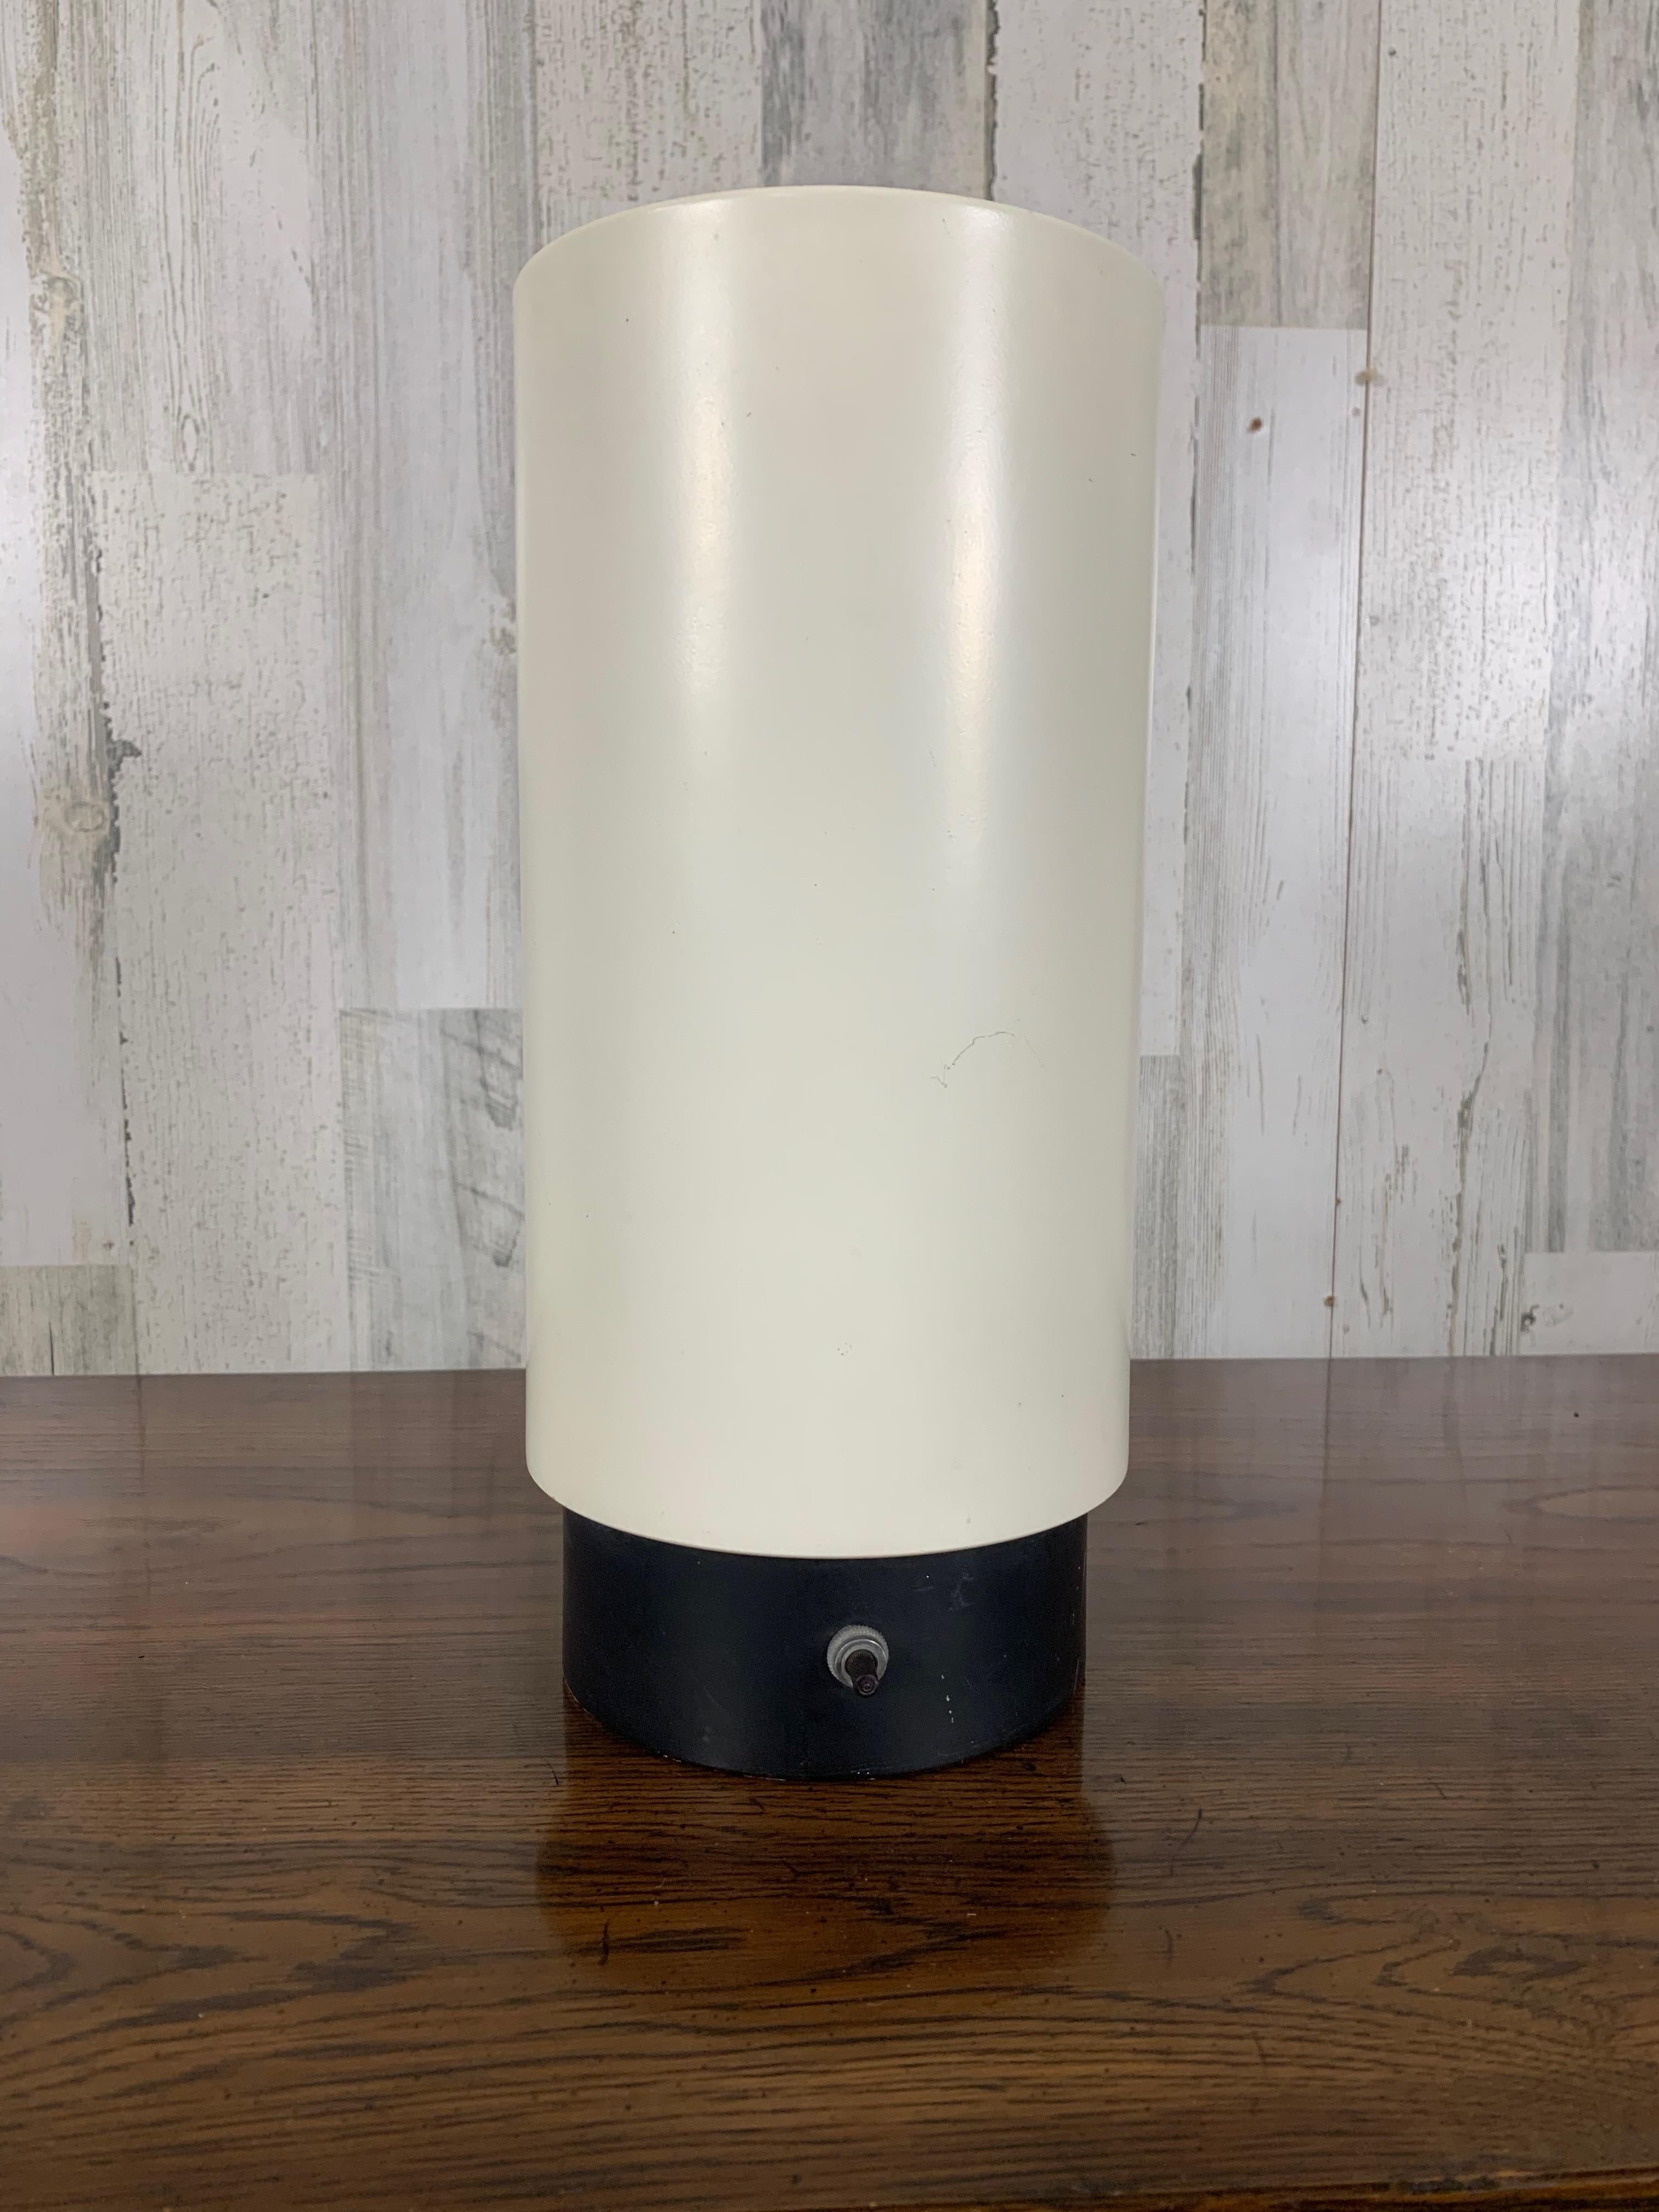 Aluminum cylinder with black metal base and pleated interior by Gerald Thurston. Best used as a floor up light to create a moody ambiance or to highlight a architechual element in the room.